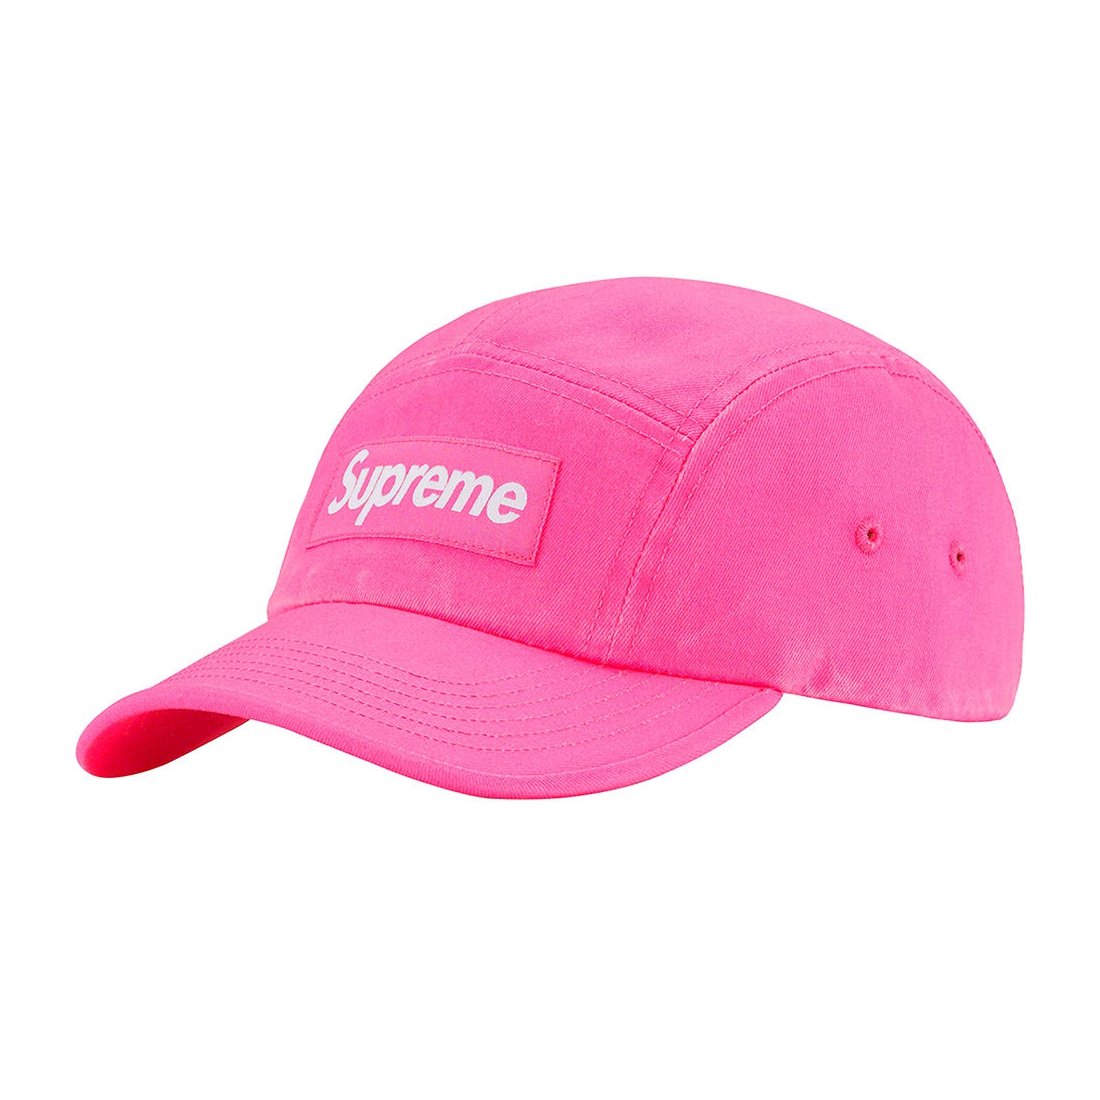 Details on Washed Chino Twill Camp Cap Pink from spring summer 2023 (Price is $48)